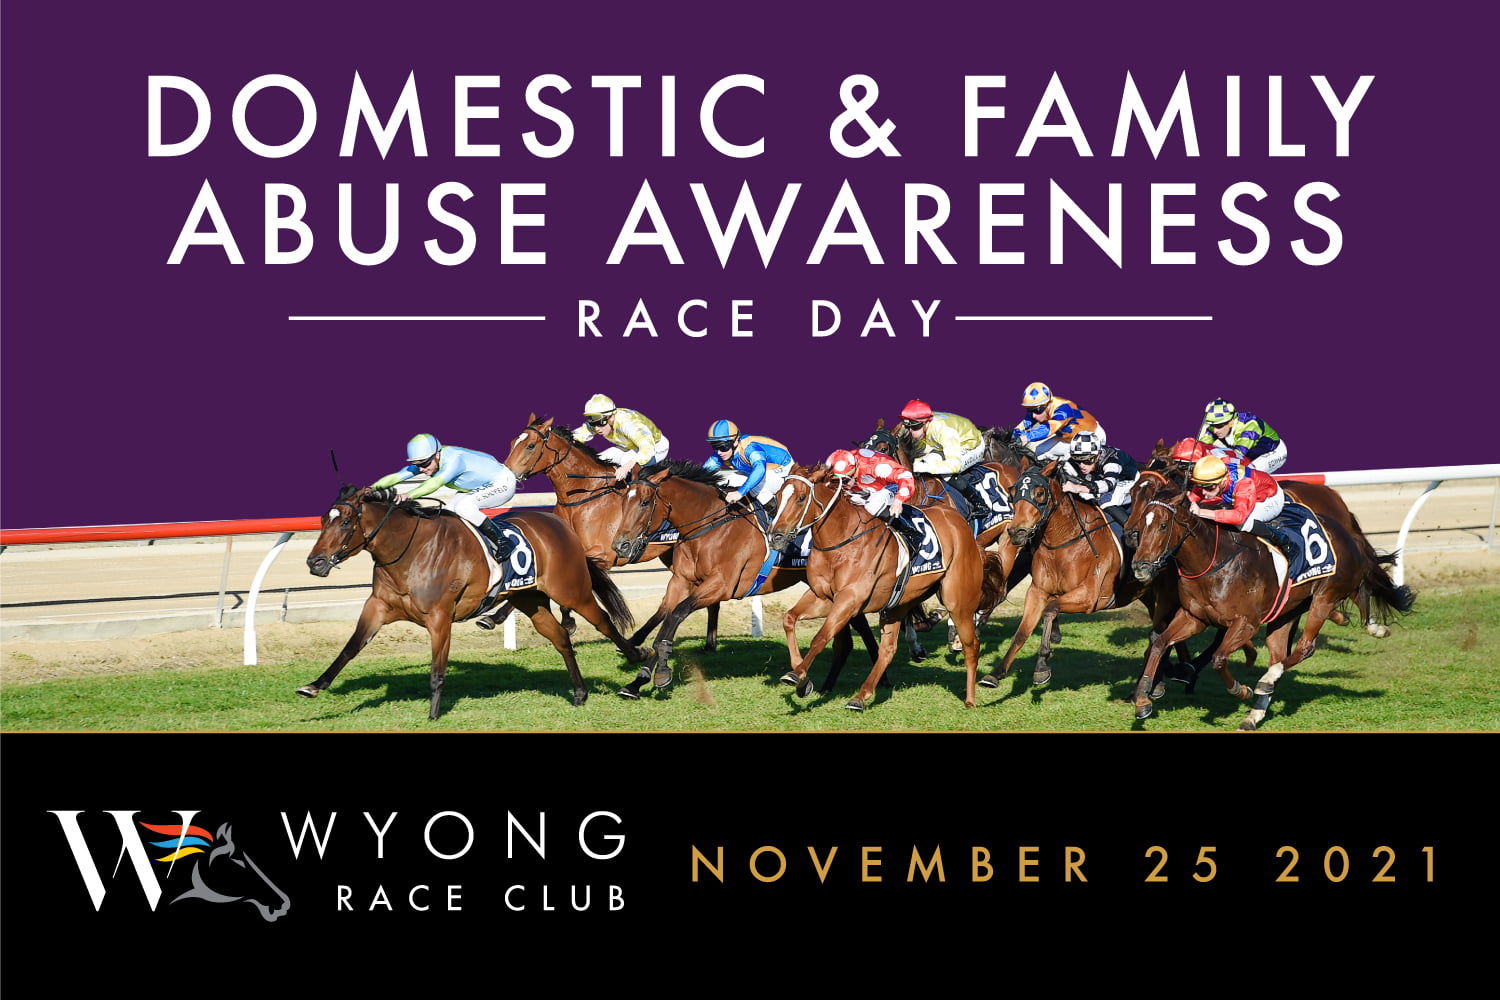 Domestic & Family Abuse Awareness Race Day